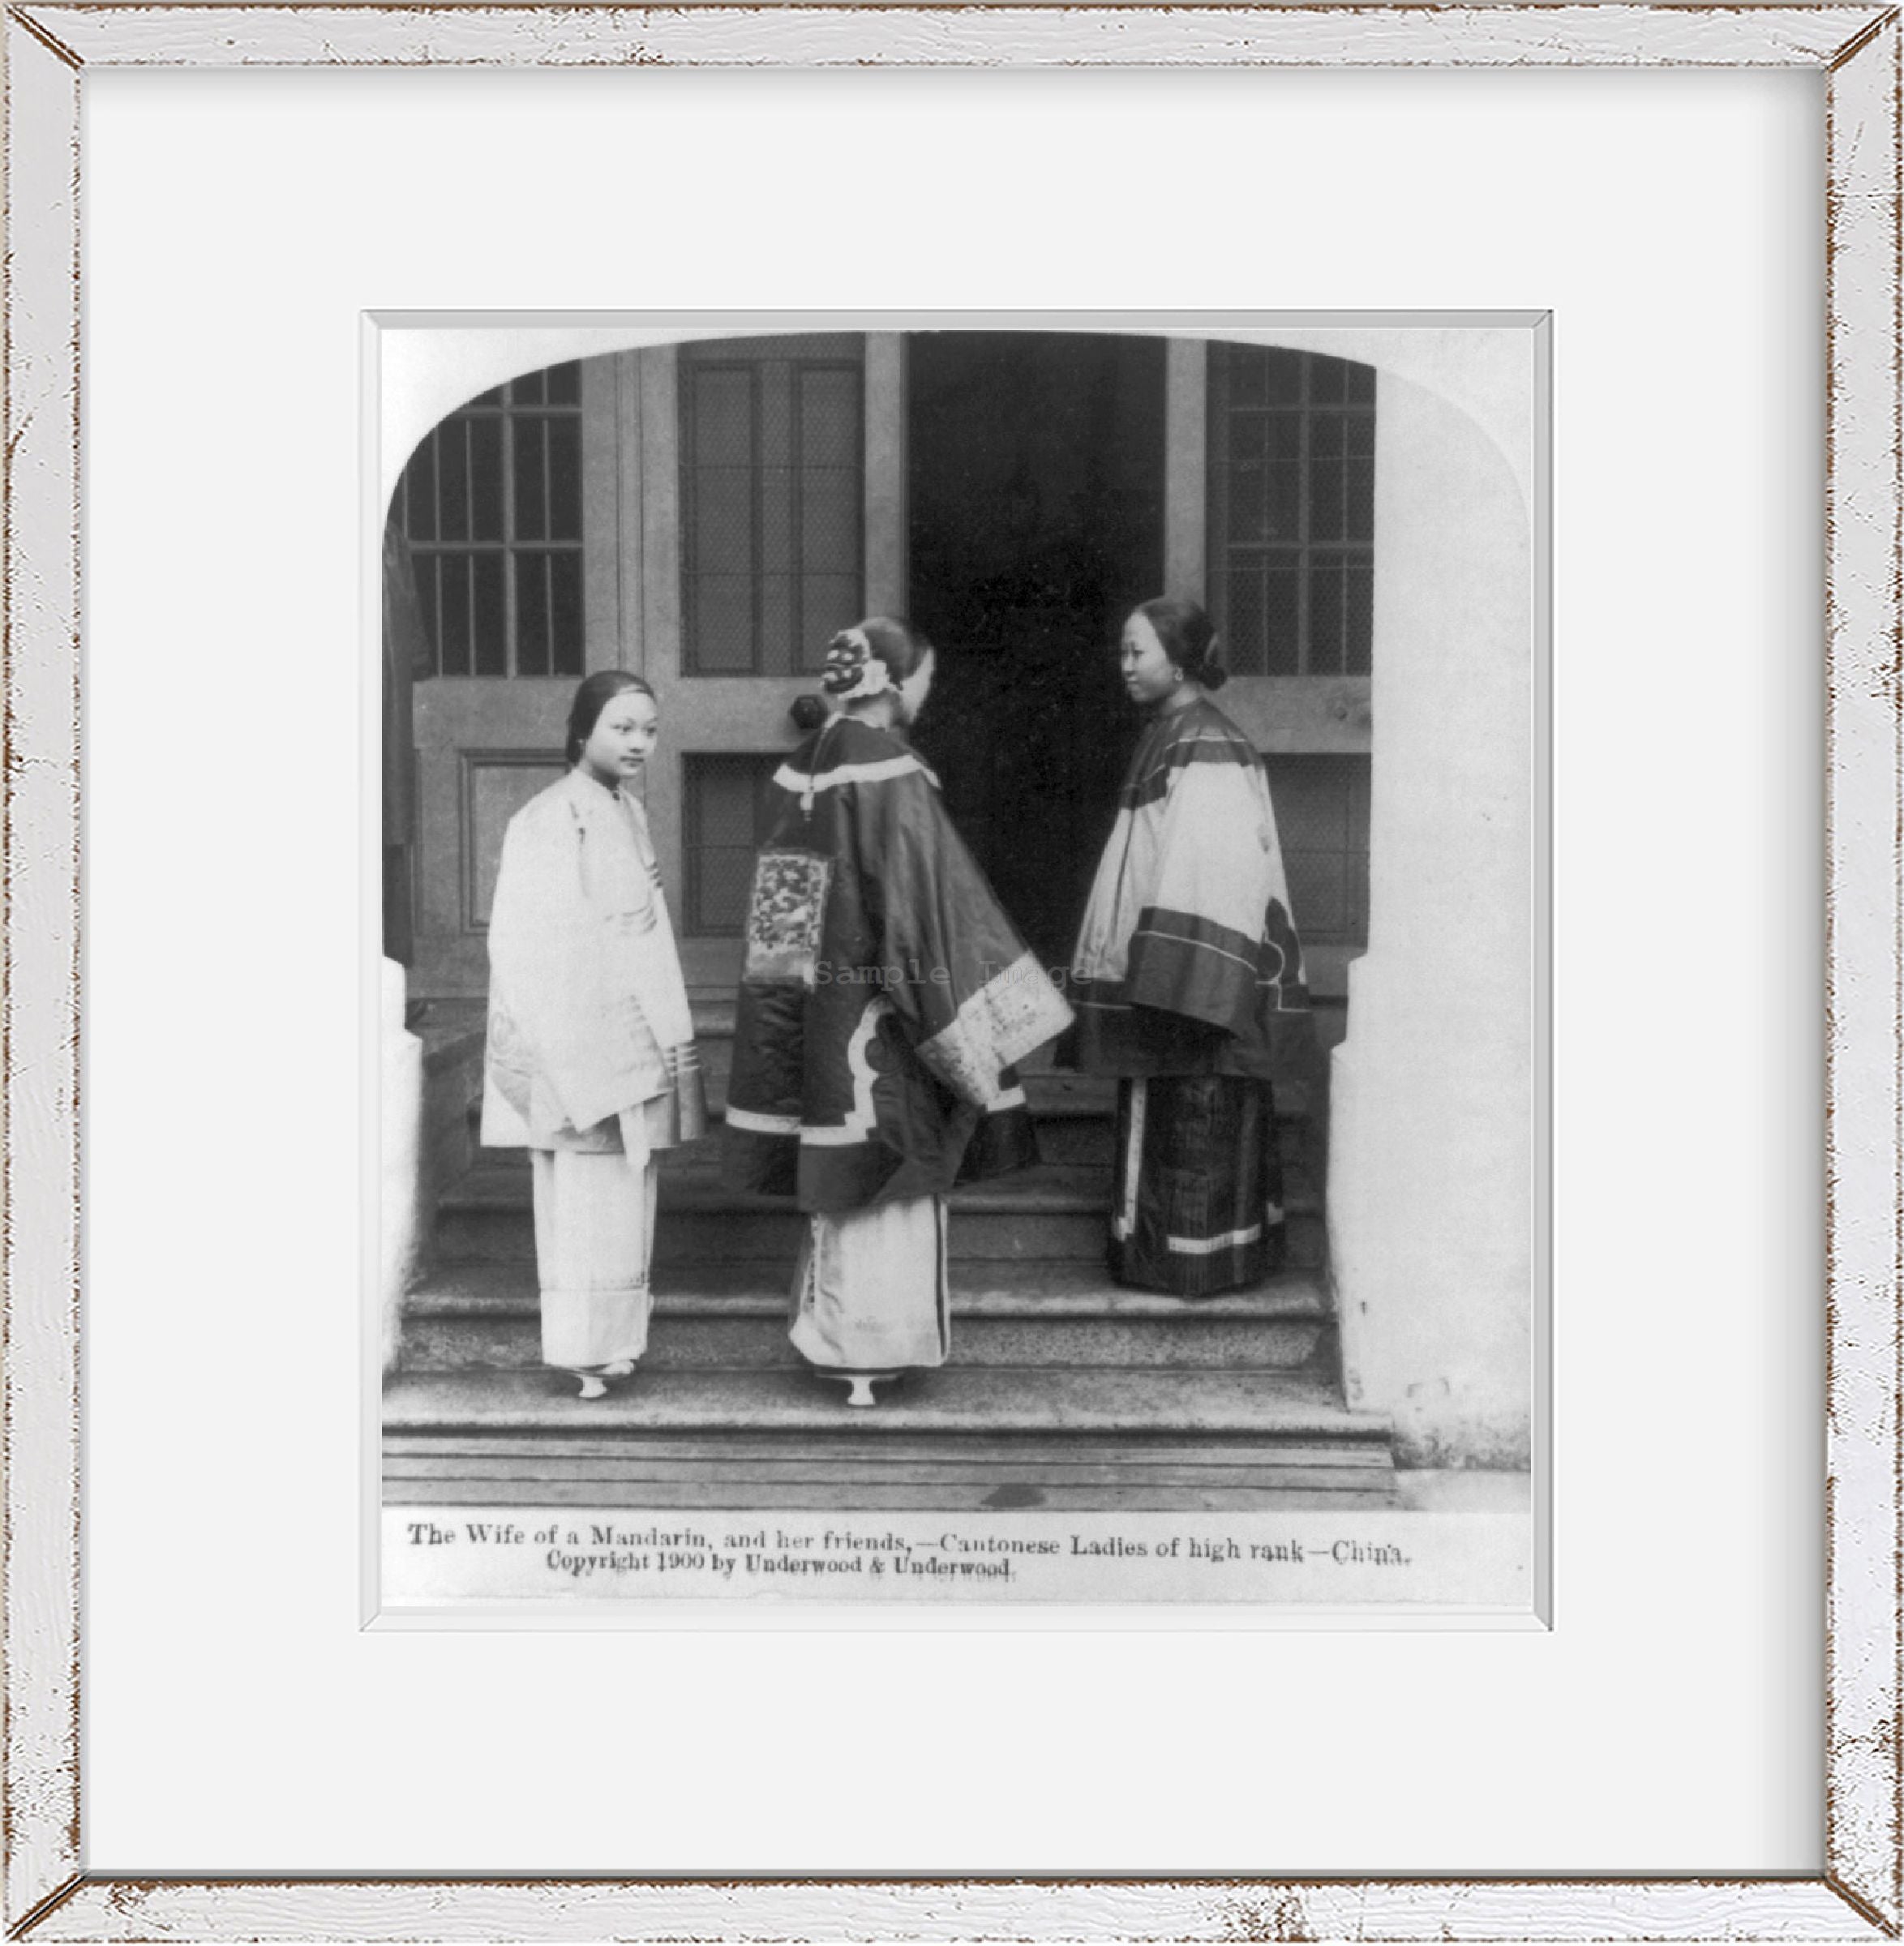 1900 Photo The wife of a Mandarin and her friends - Cantonese ladies of high ran